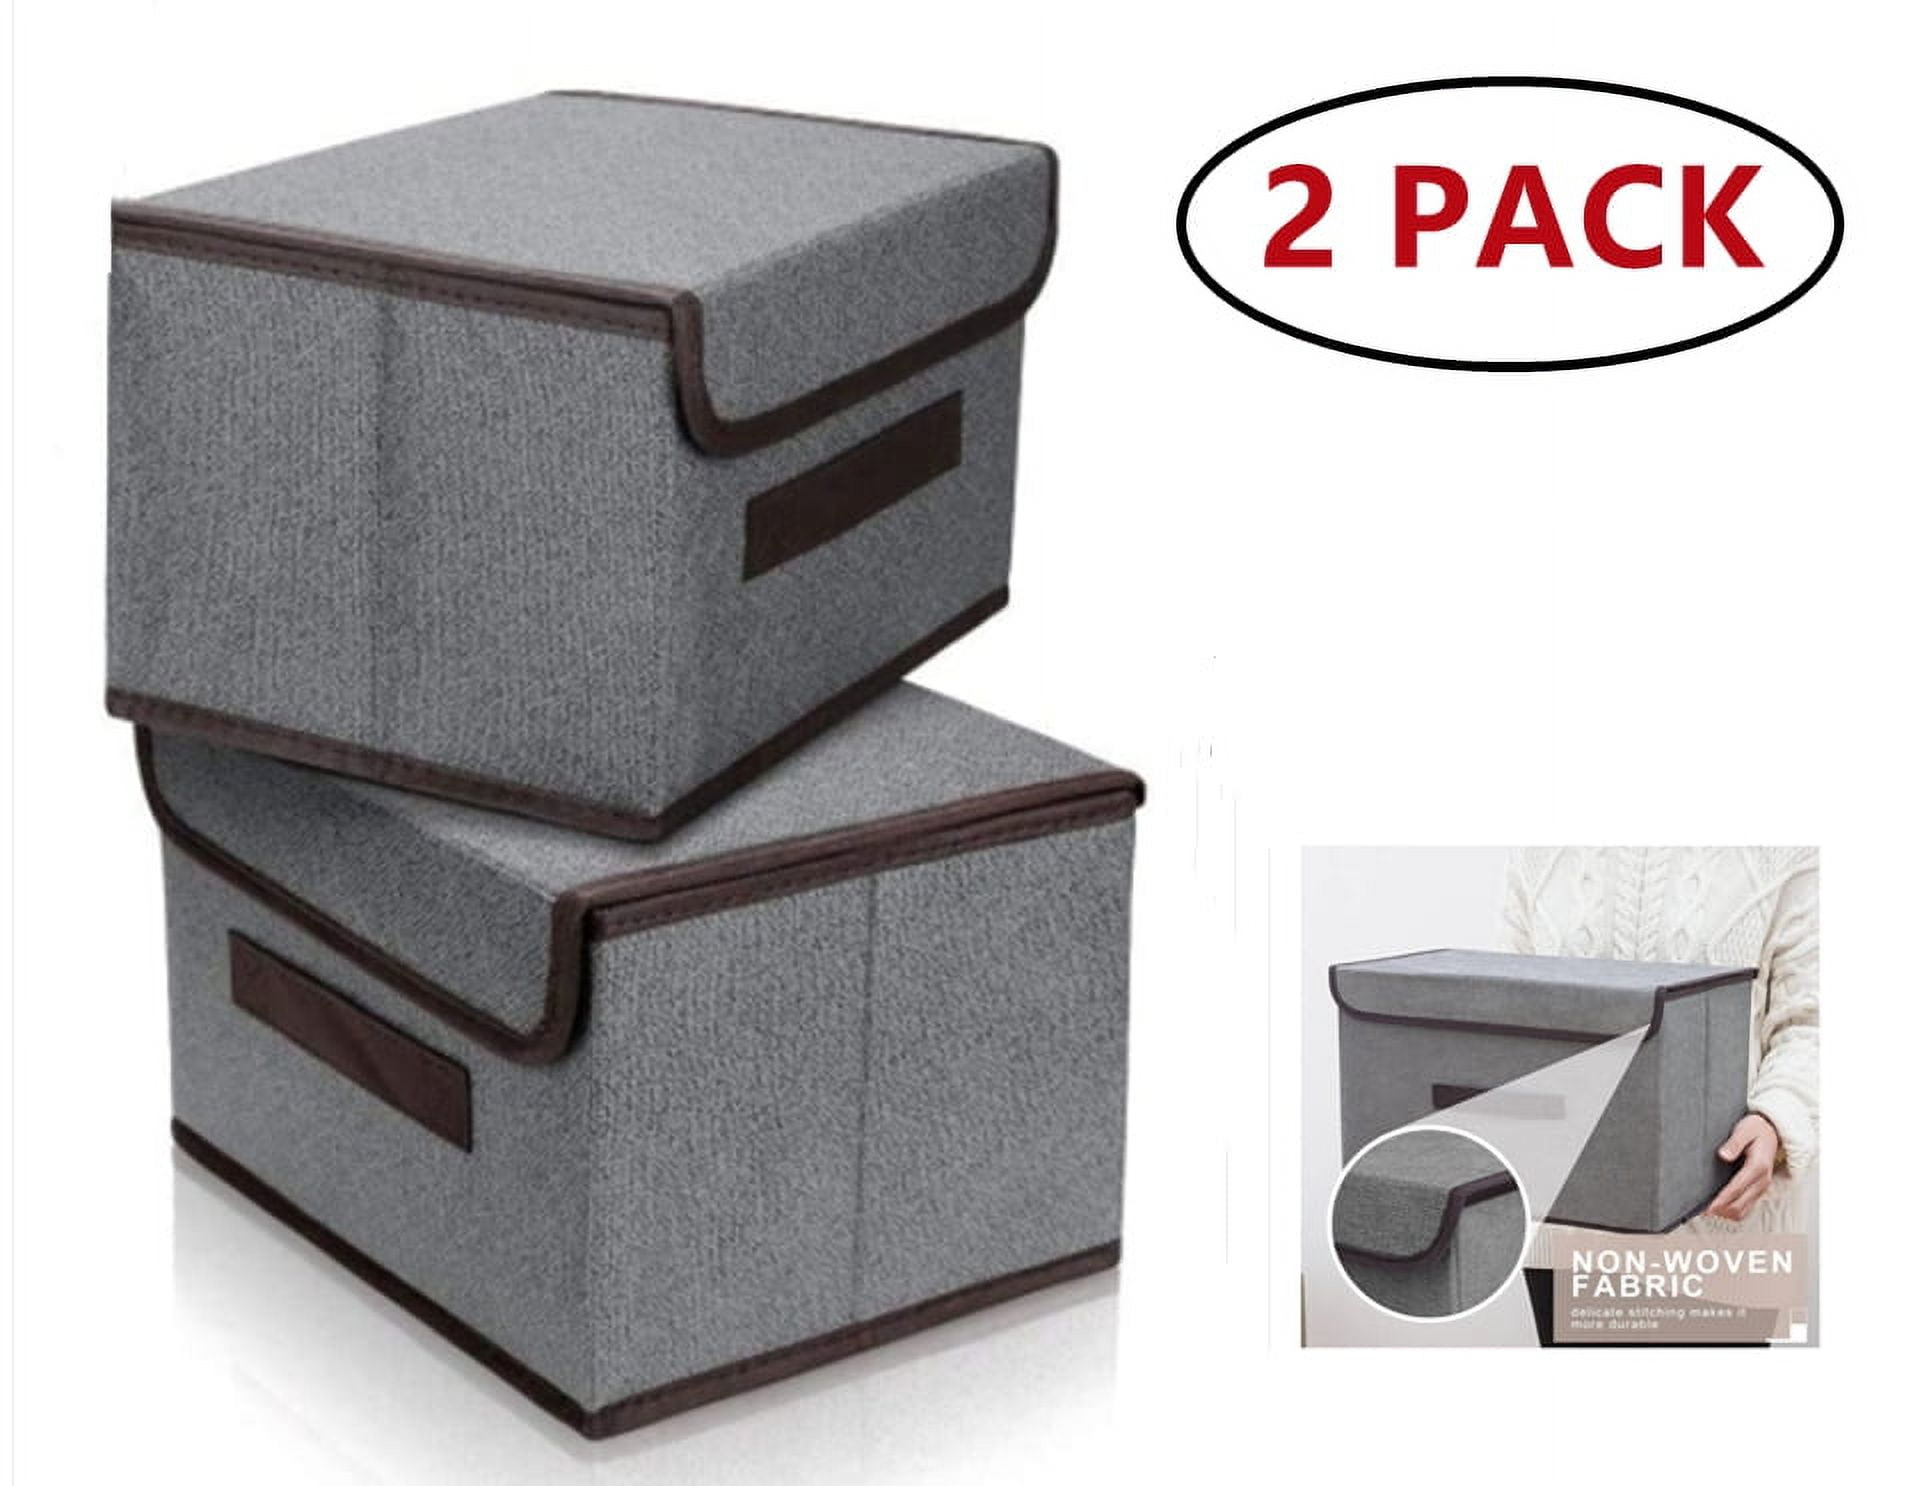 Posprica Storage Cubes, 1212 Collapsible Storage Basket Bins,Heavy Duty Fabric Containers, 4pcs, Grey